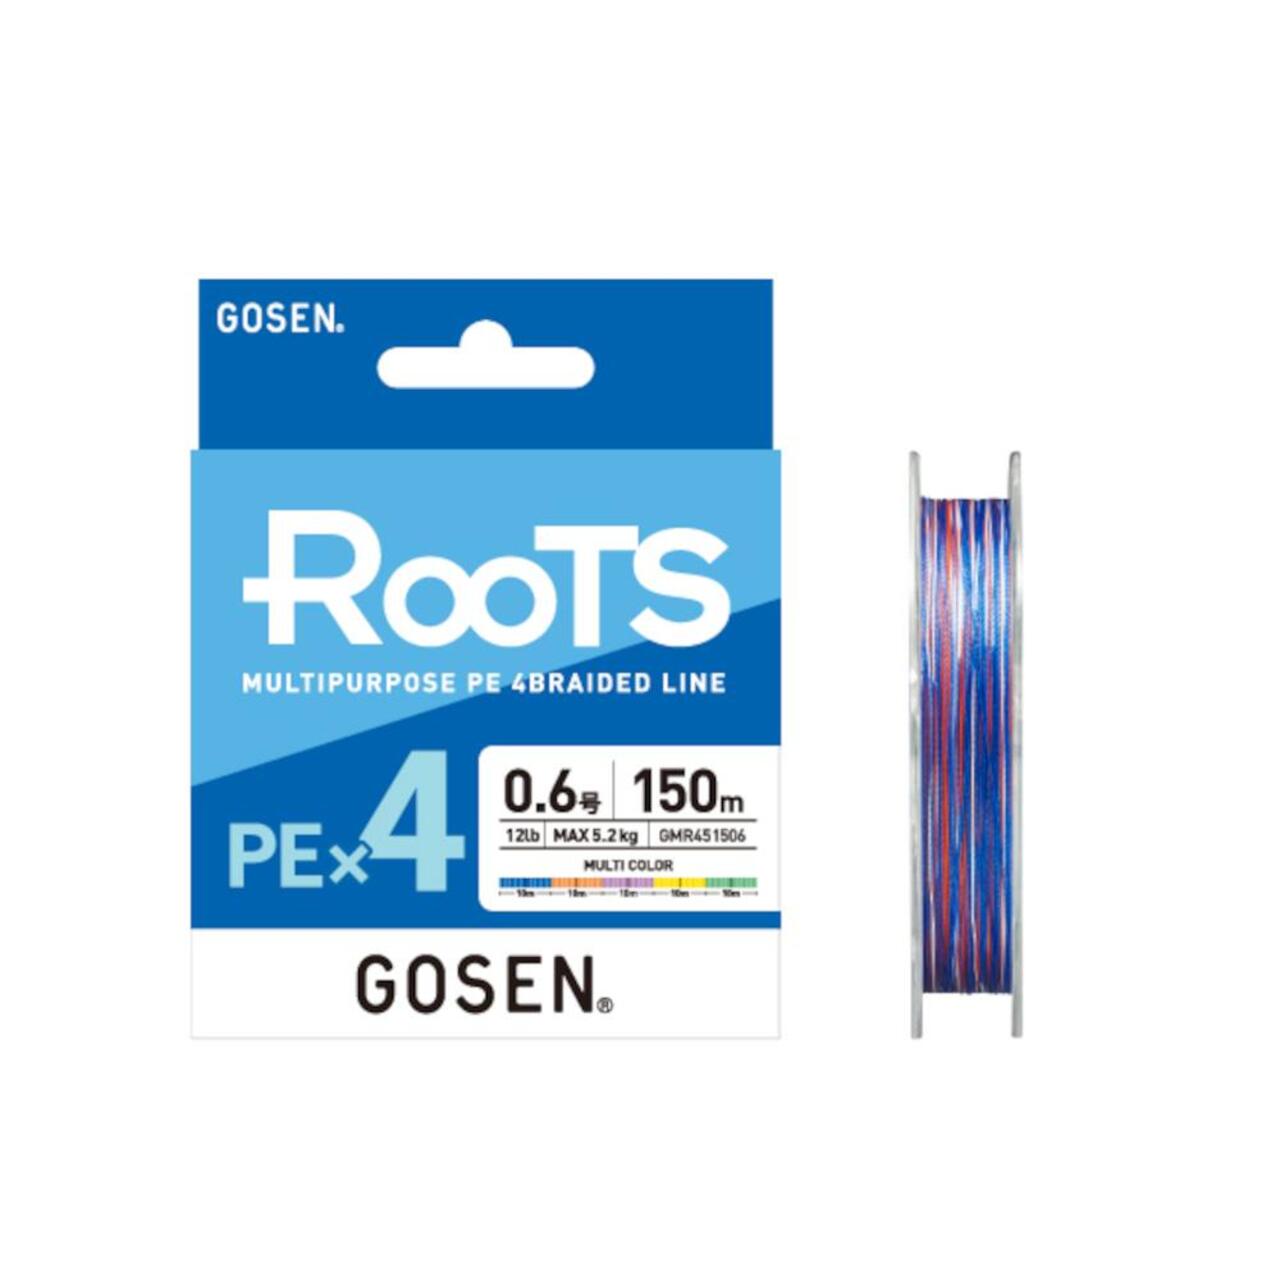 Braided Line Gosen ROOTS PE X4 MULTI 200m ✴️️️ Main Line ✓ TOP PRICE -  Angling PRO Shop